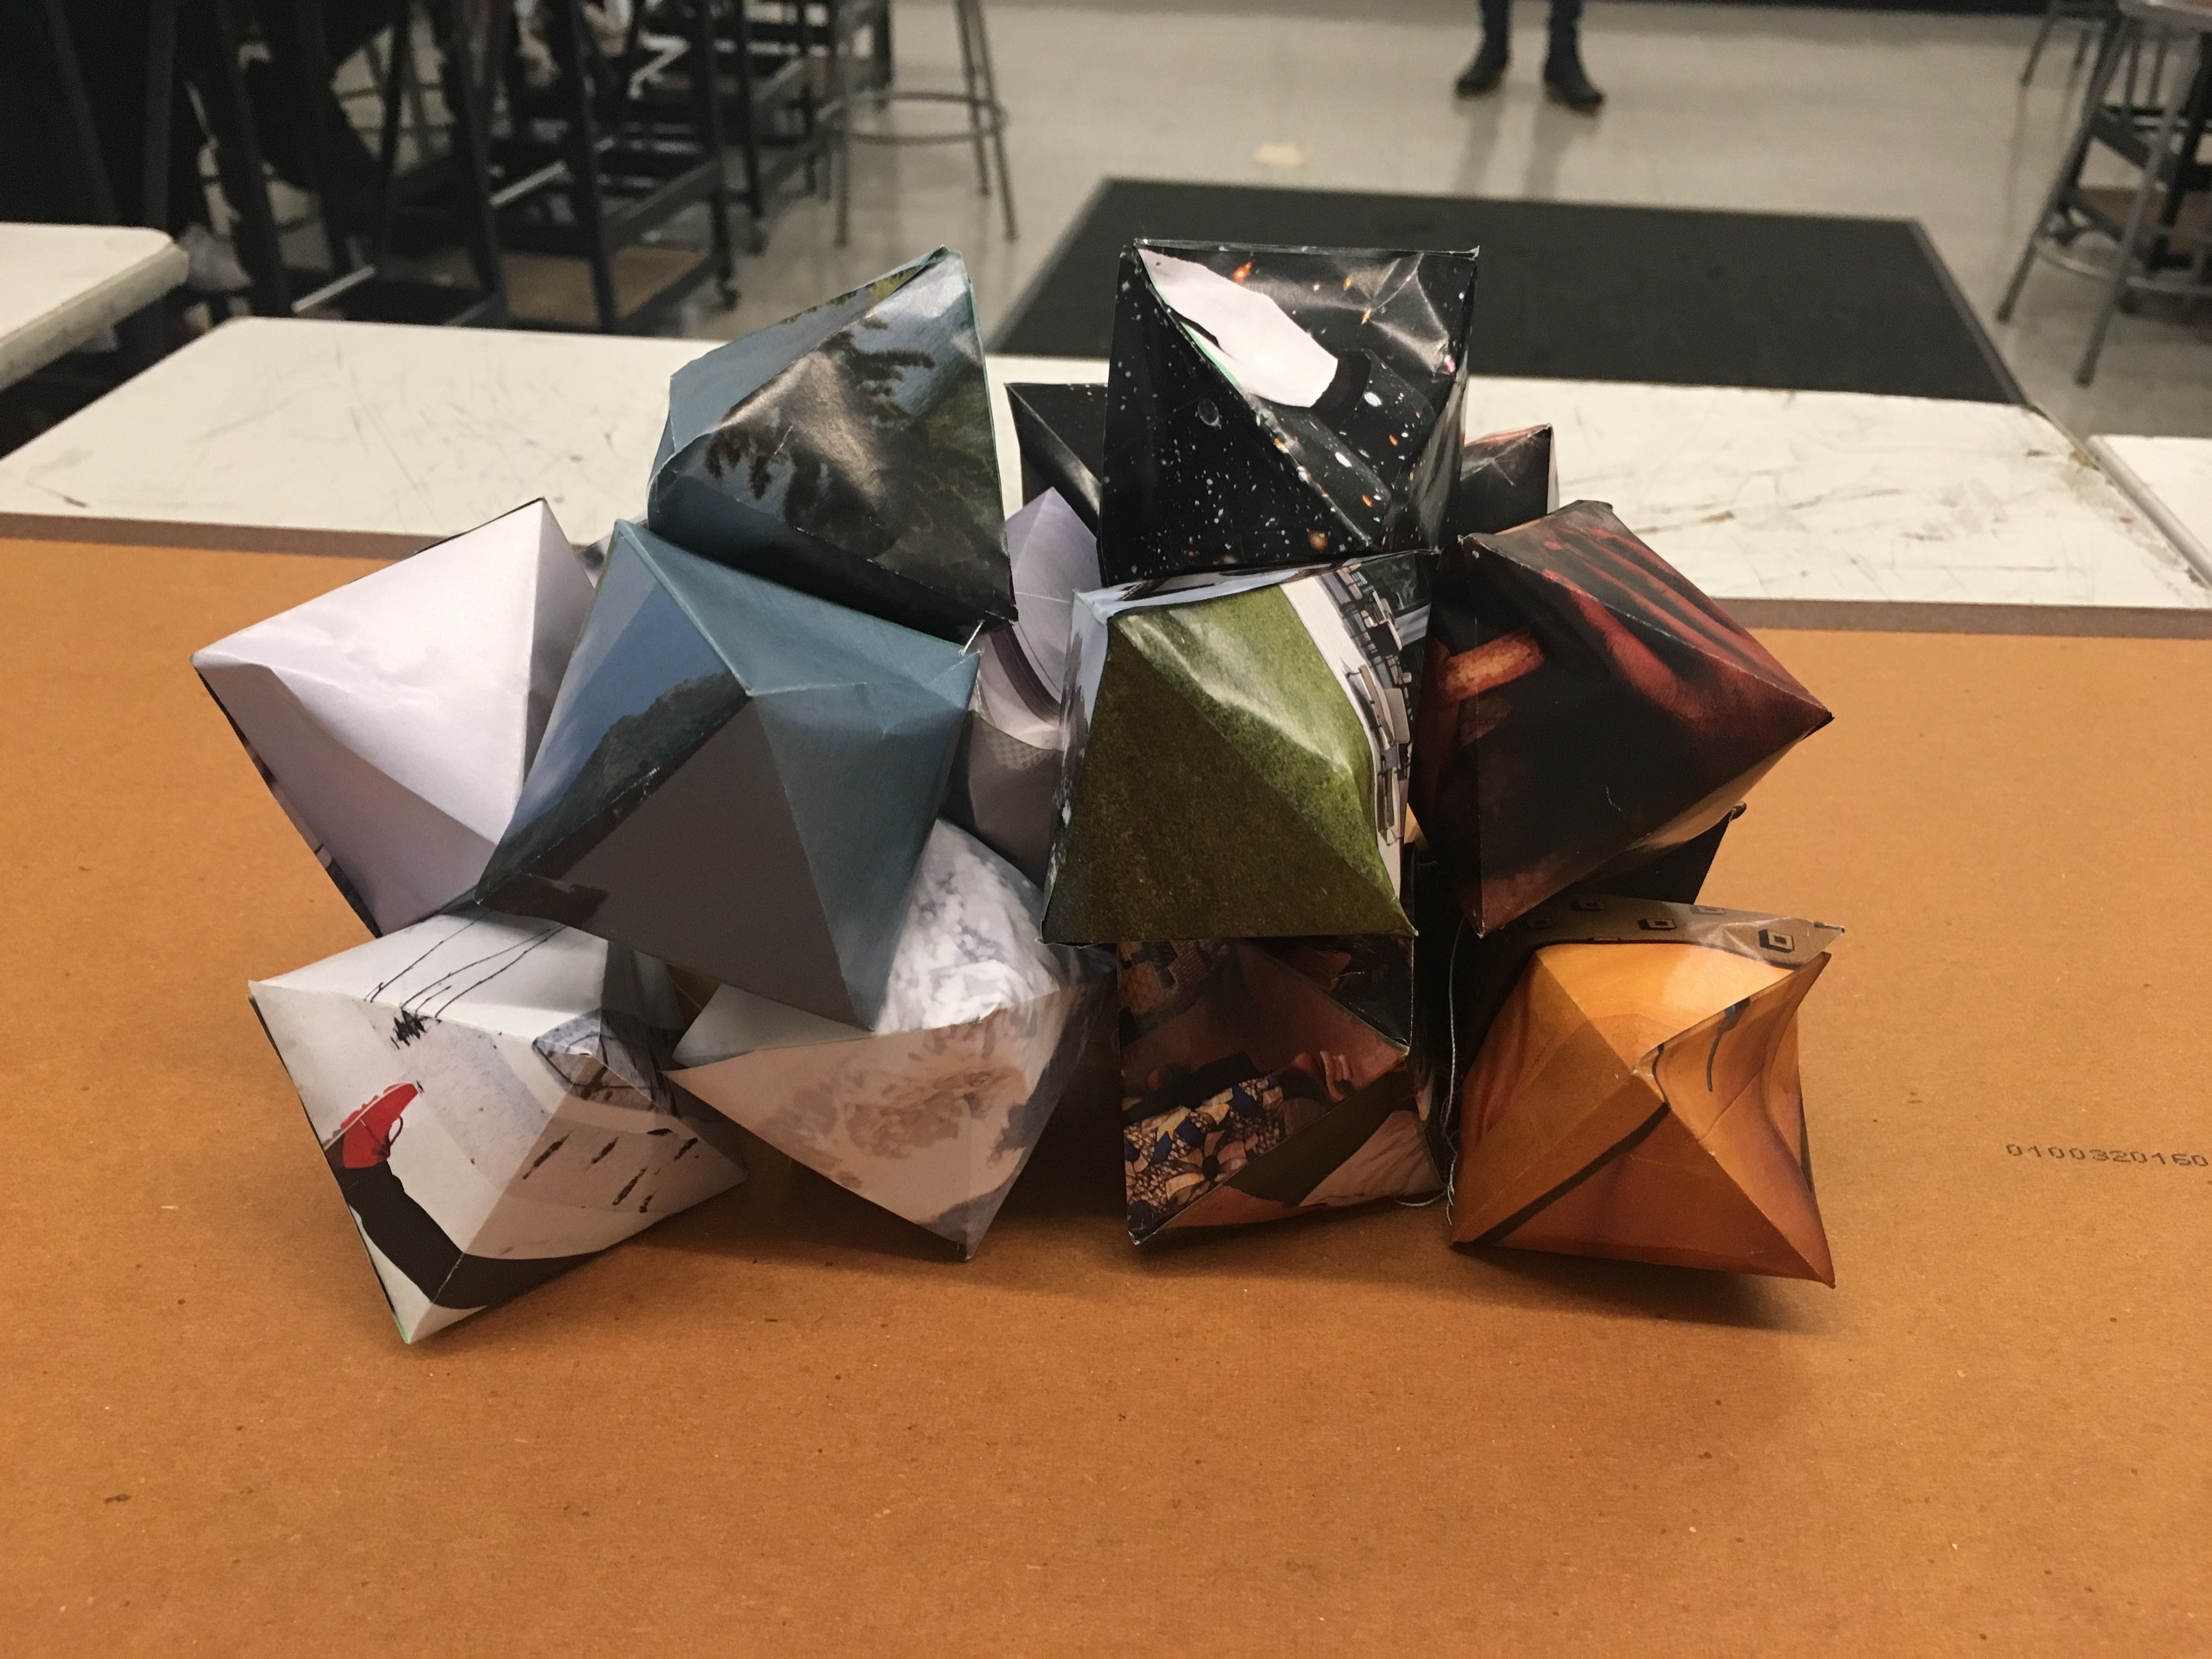 Polyhedron Project